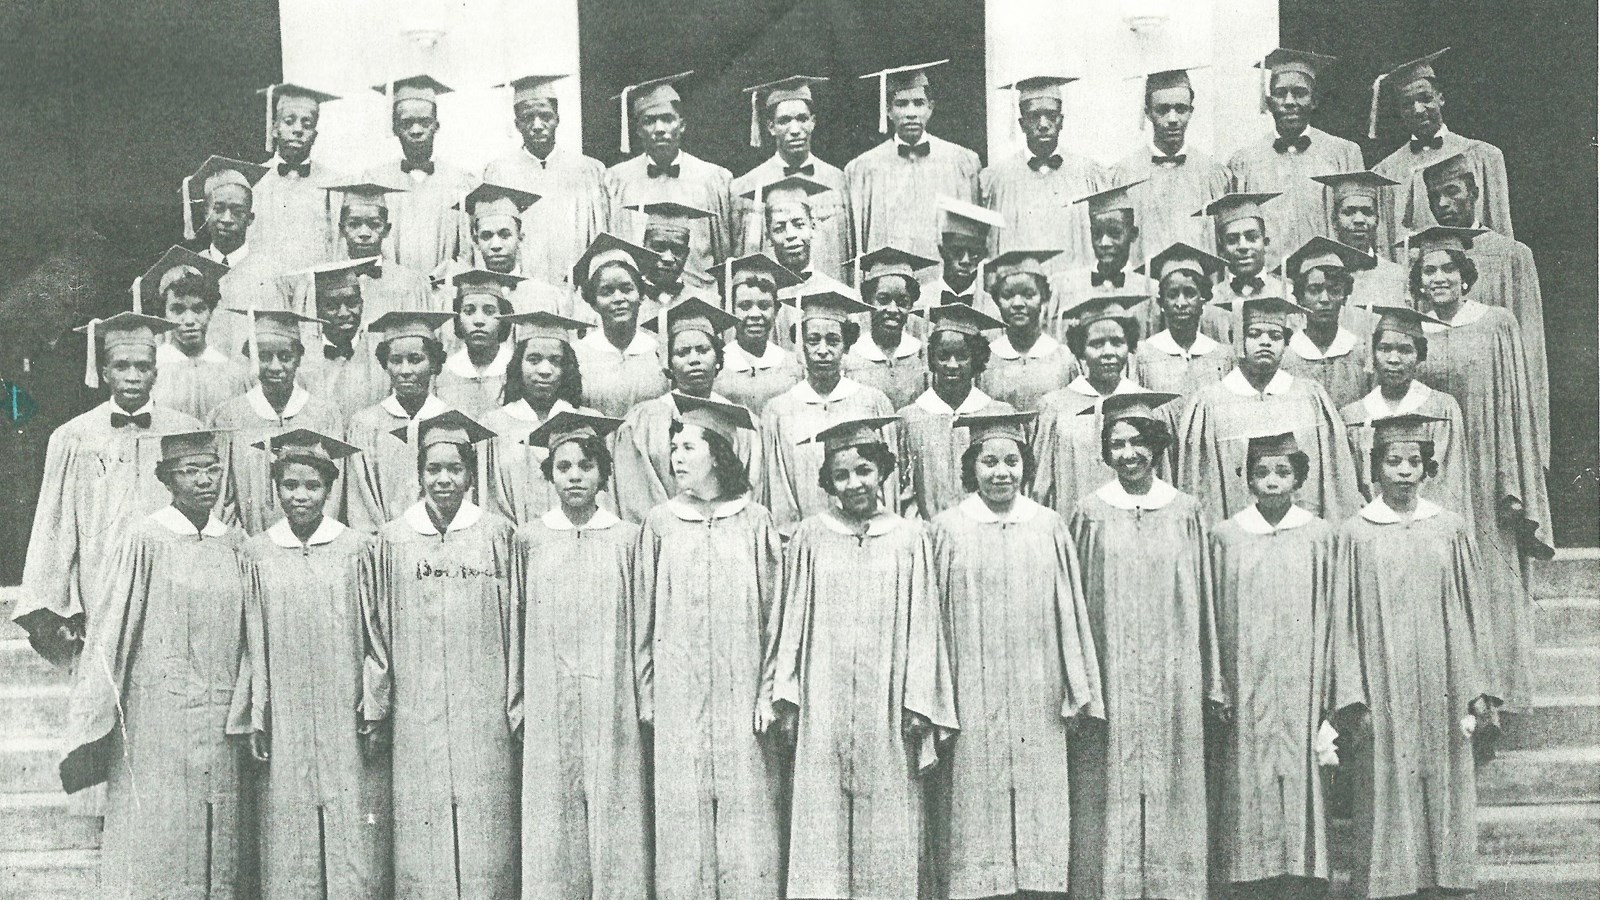 Black and white photo of graduating students lined up in rows on the steps of a building. 